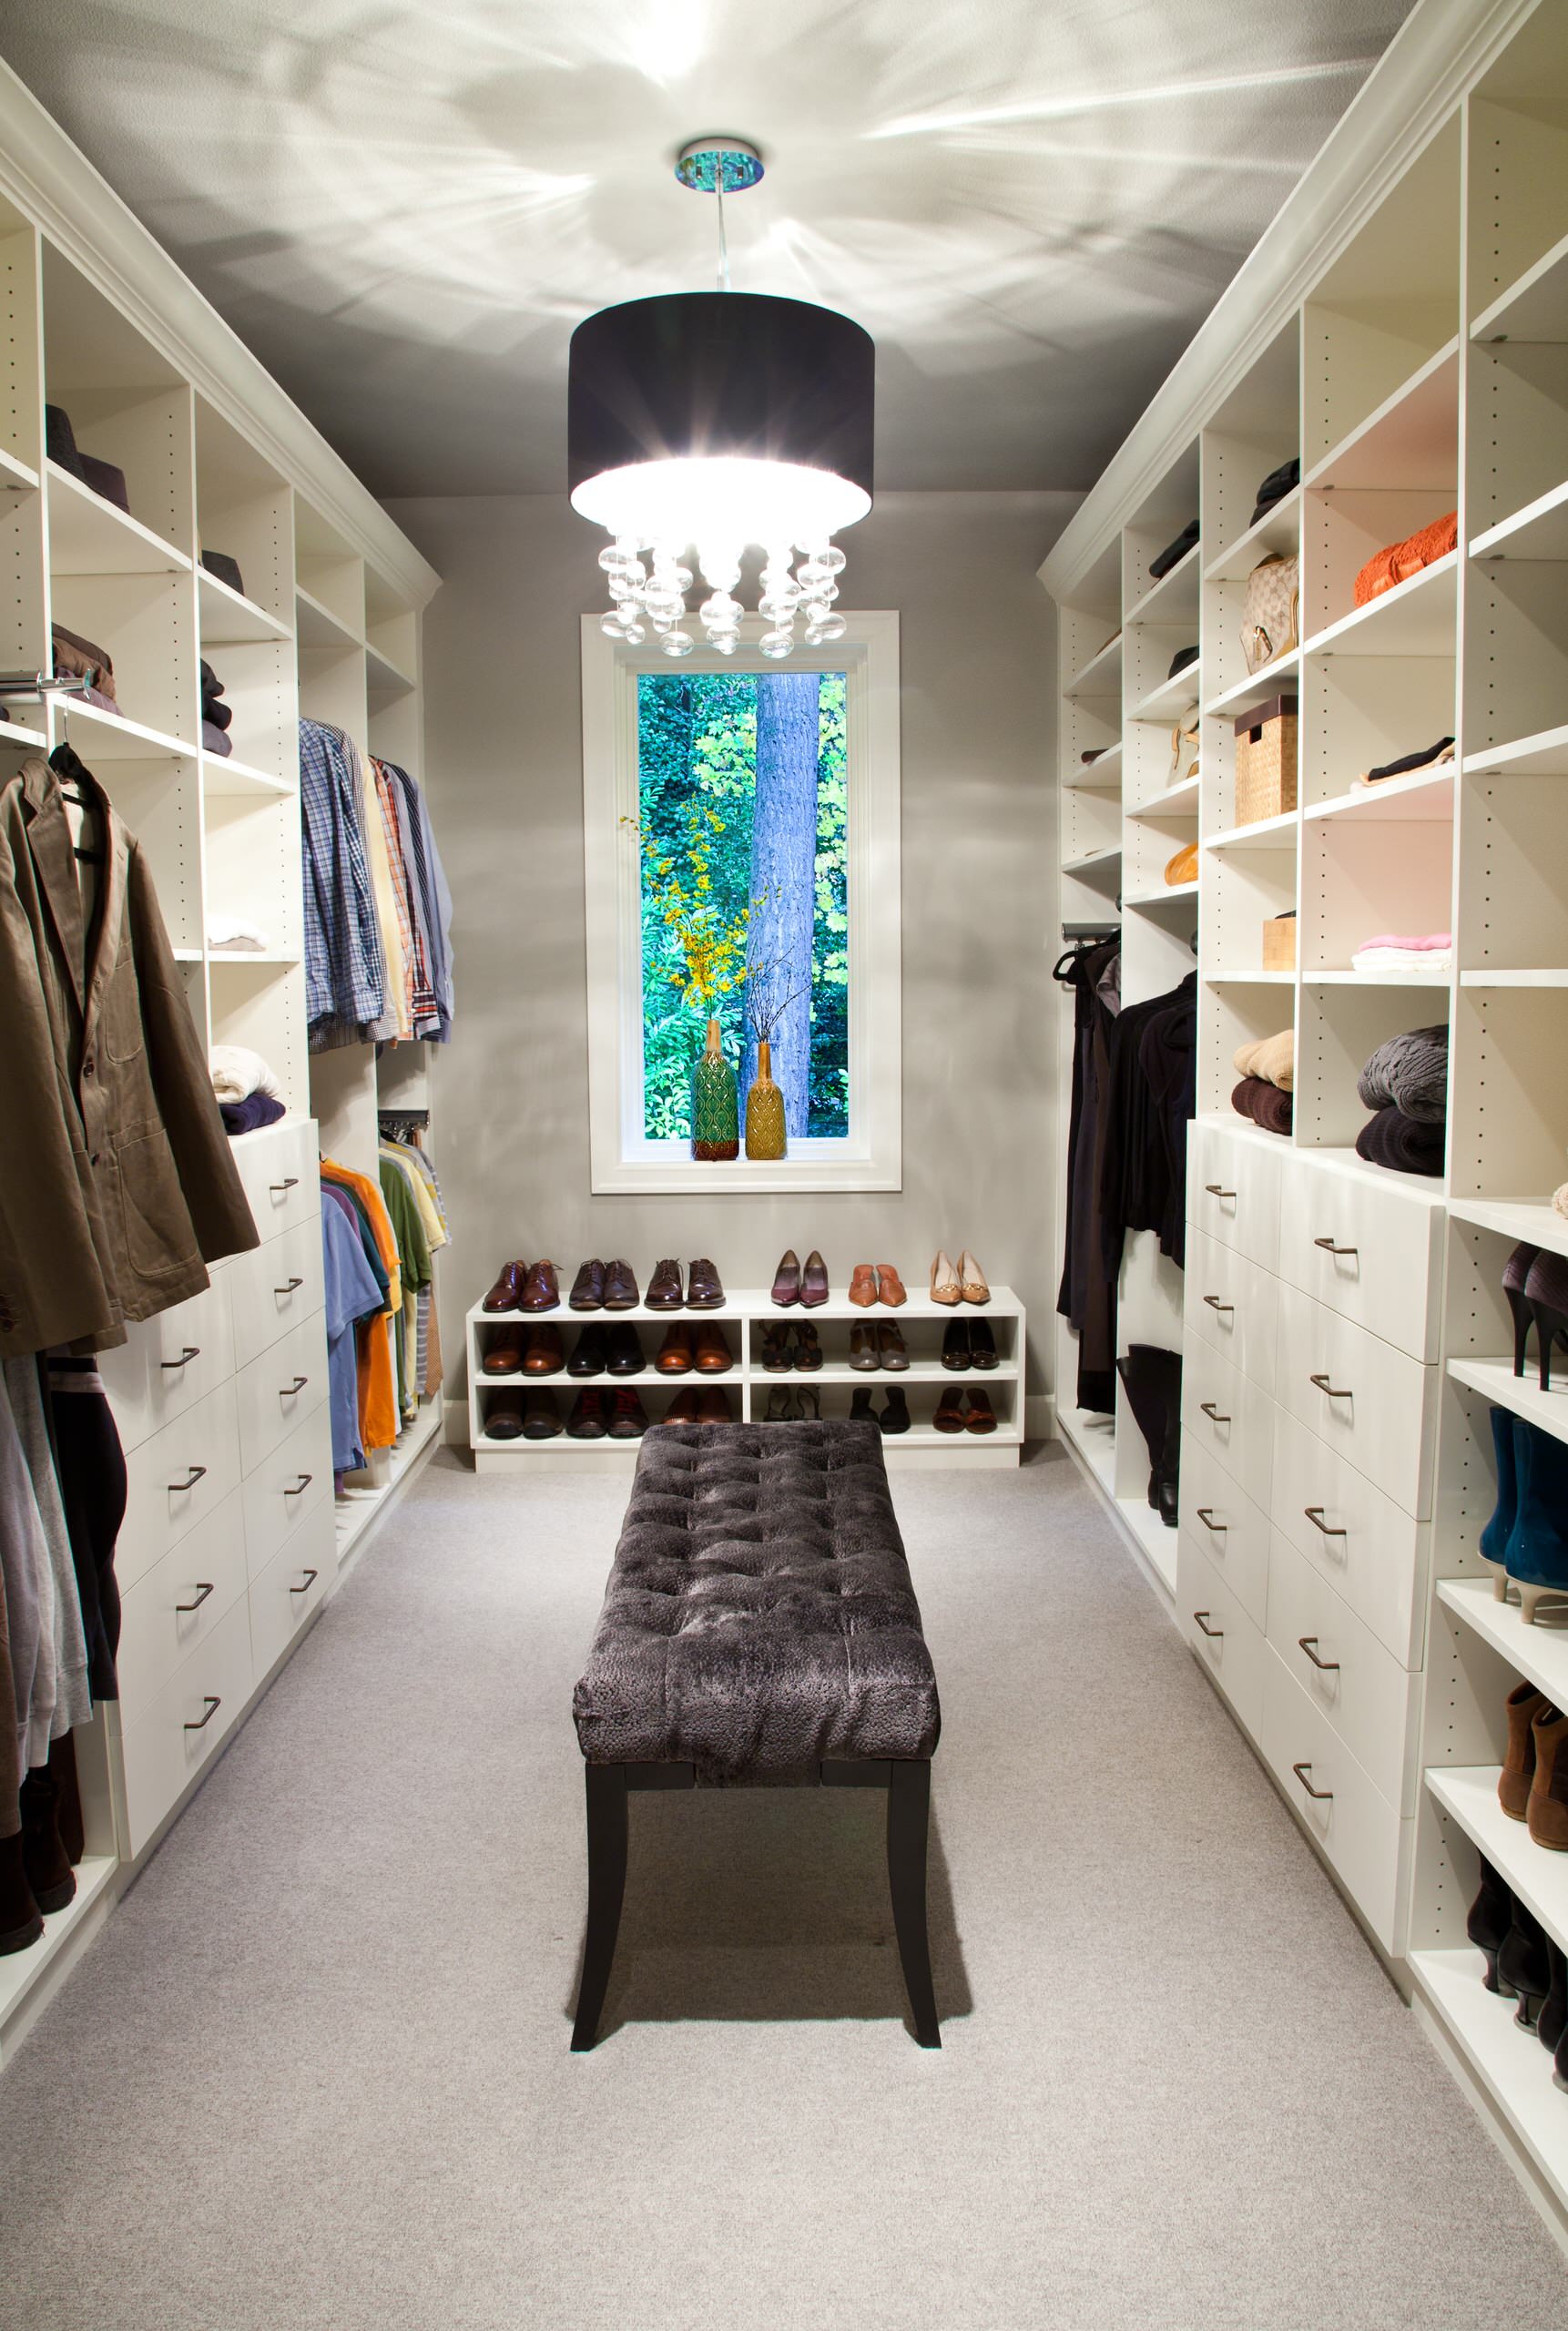 https://st.hzcdn.com/simgs/pictures/closets/dunthorpe-estate-oregon-walk-in-closet-closet-theory-by-janie-lowrie-img~a301ee6900934e87_14-5464-1-8653917.jpg